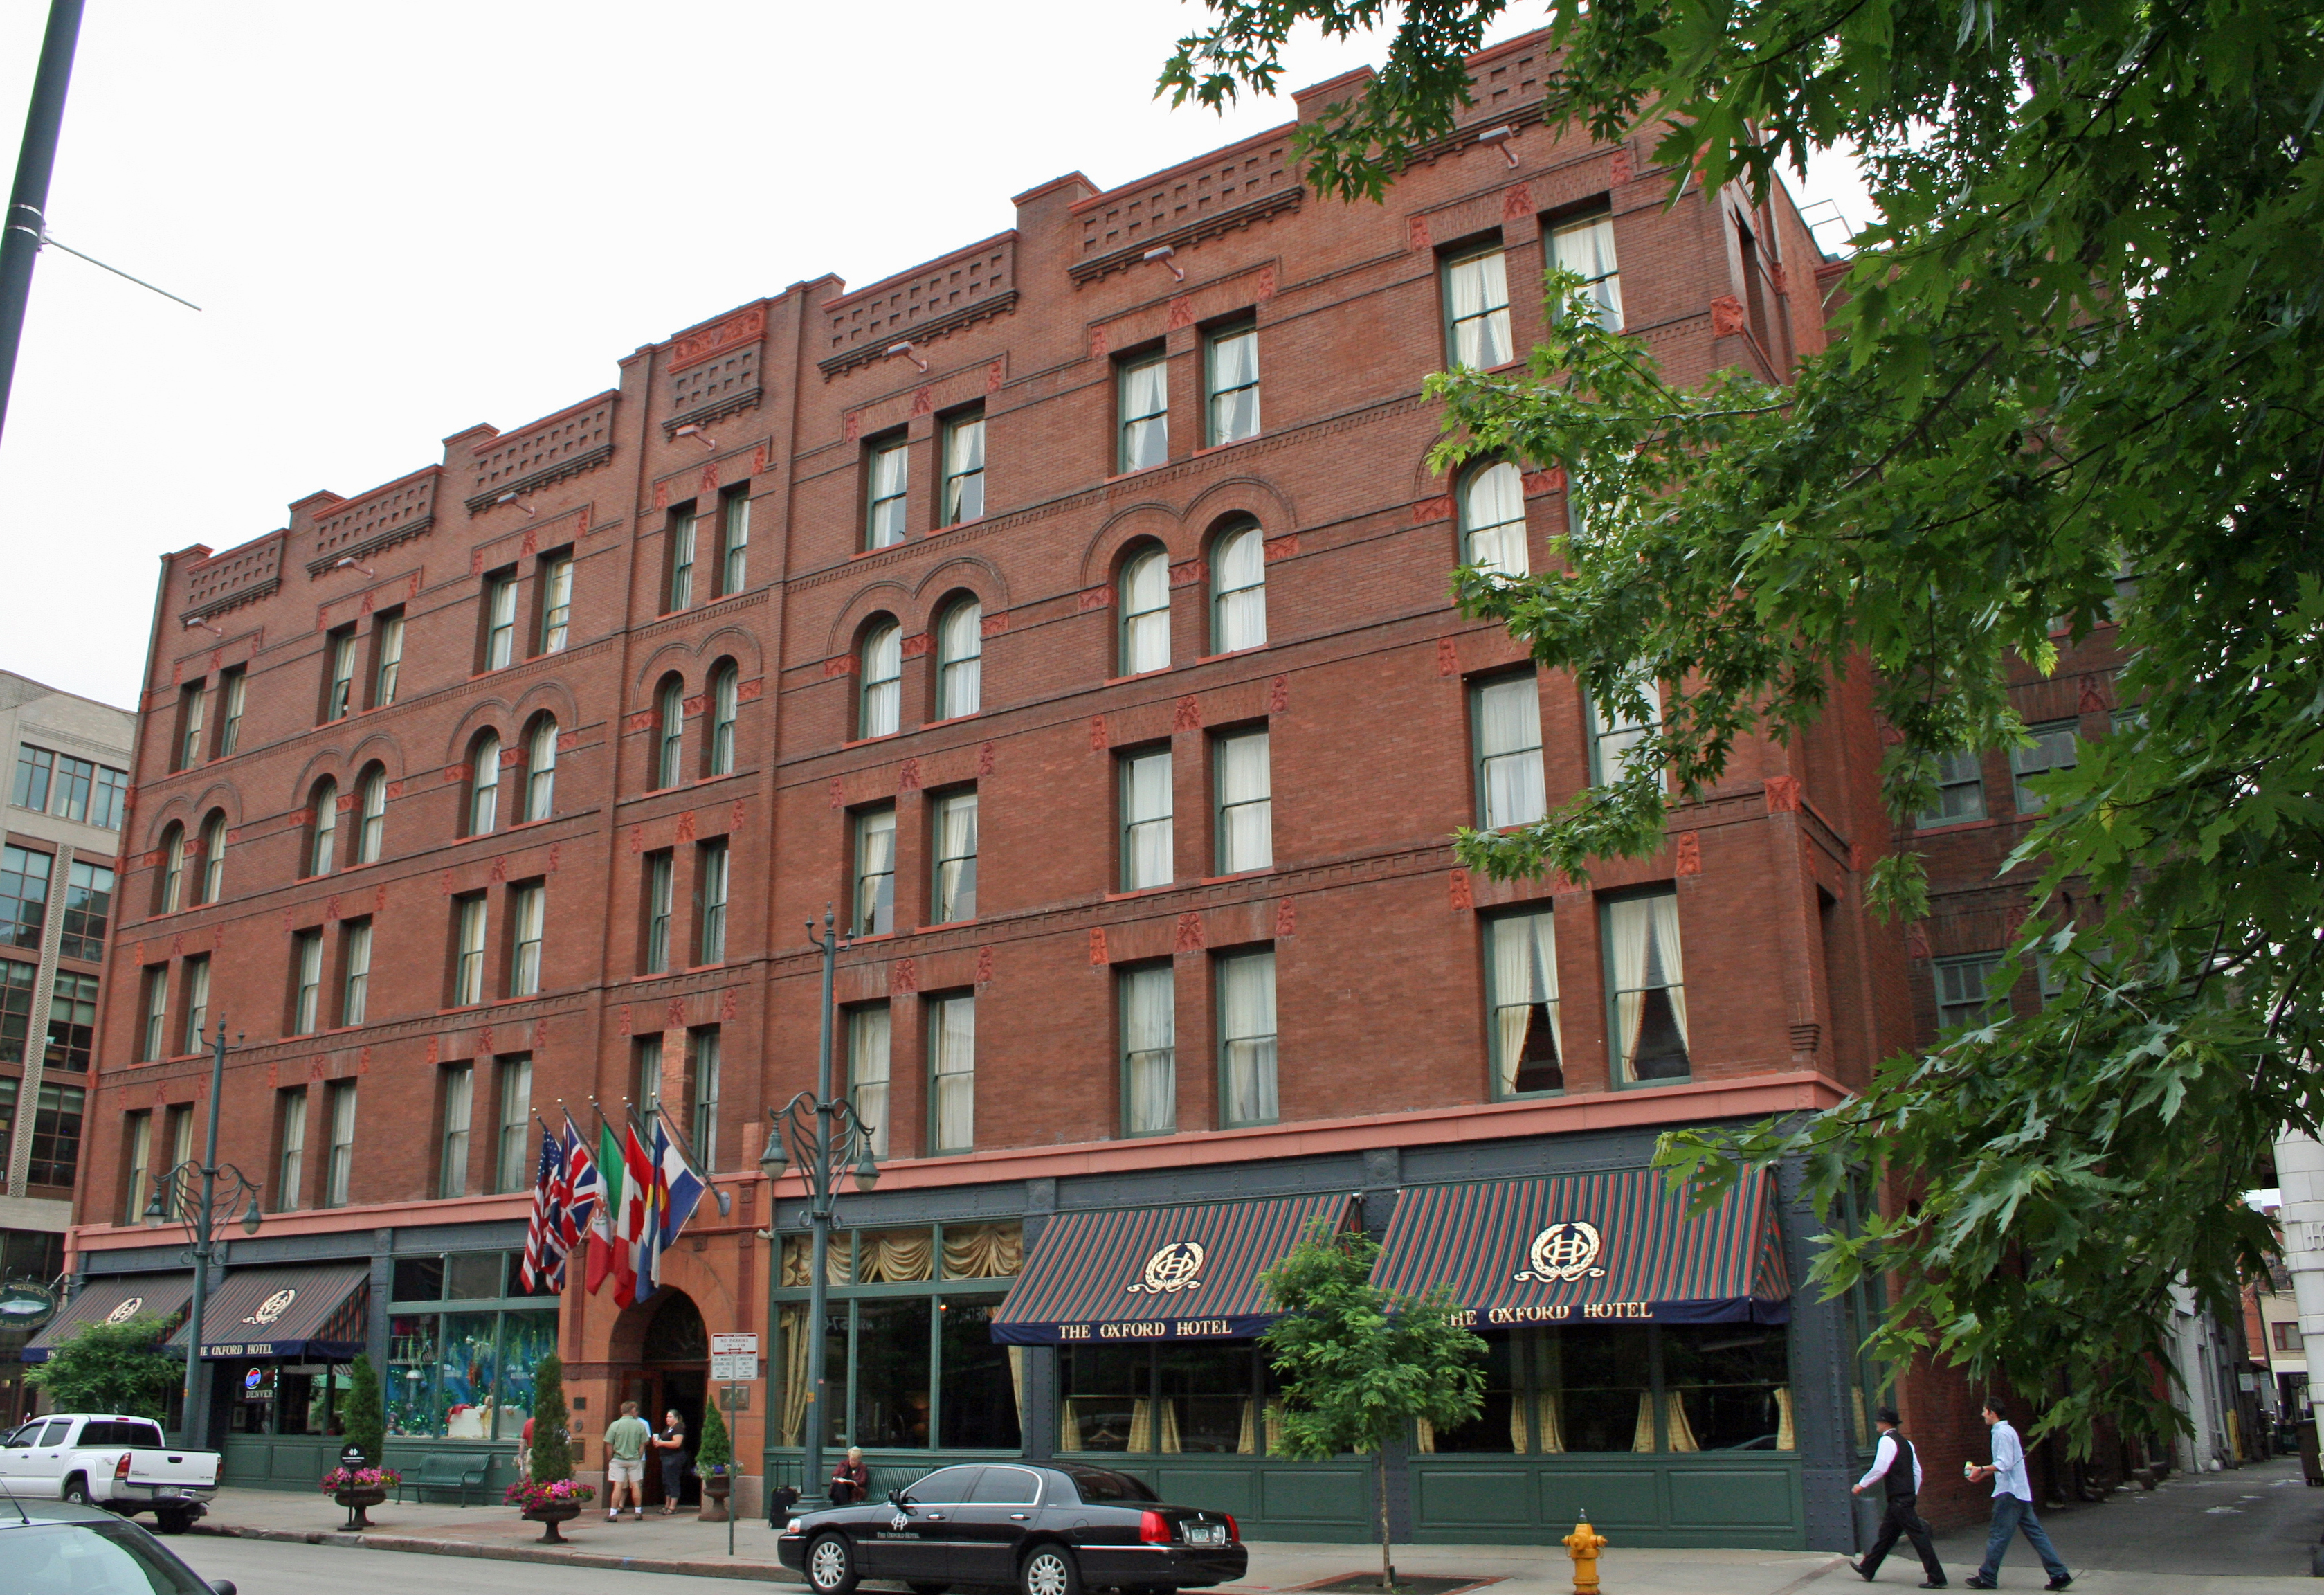 The Oxford Hotel, located at 1612 17th Street ...